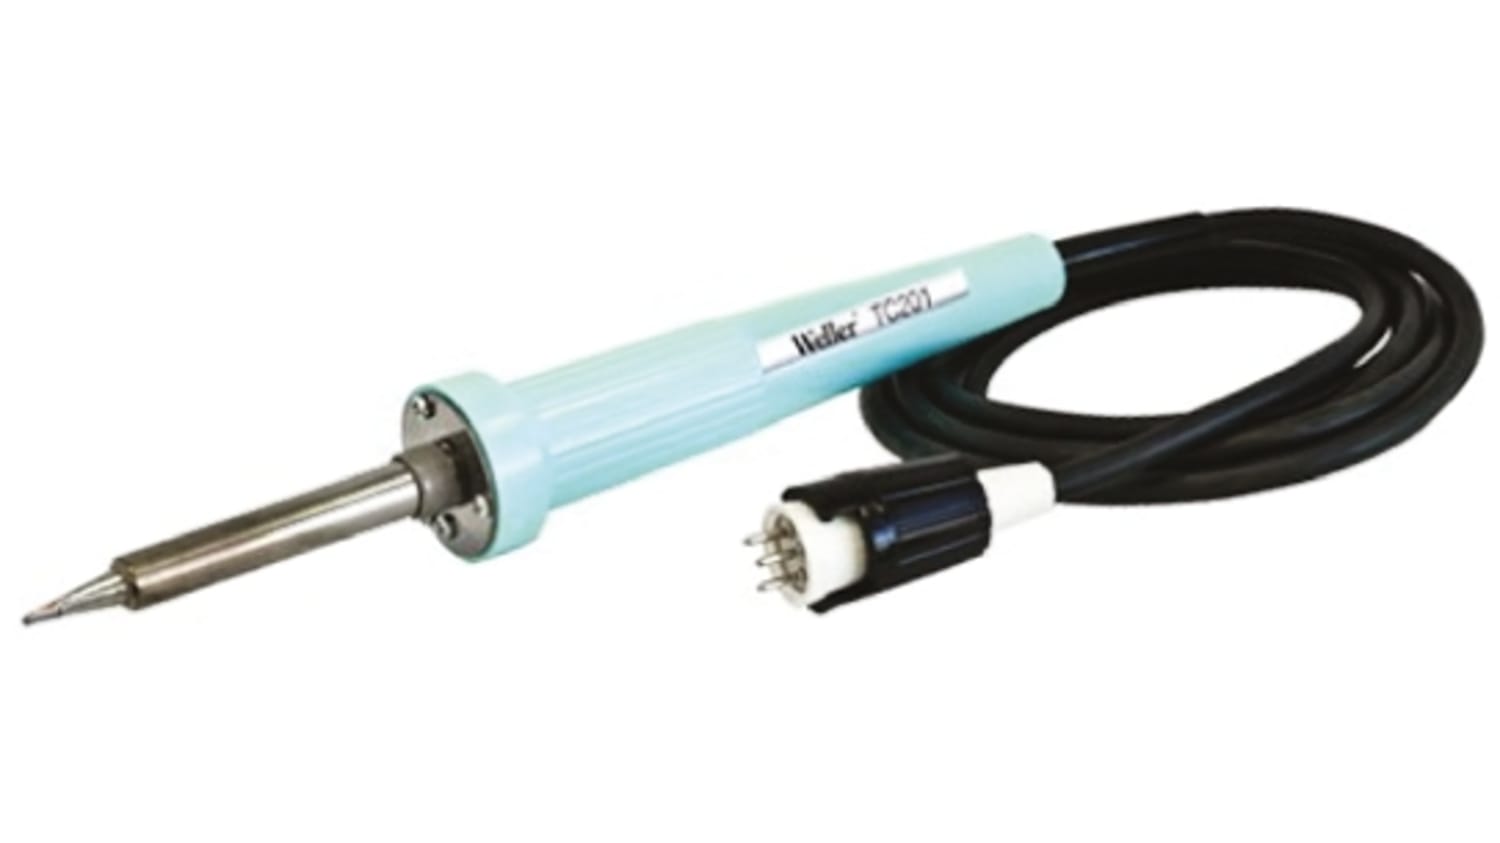 Tc201 Electric Soldering Iron 25v 40w For Use With Wtcps Wtcpt Soldering Stations Rs Components